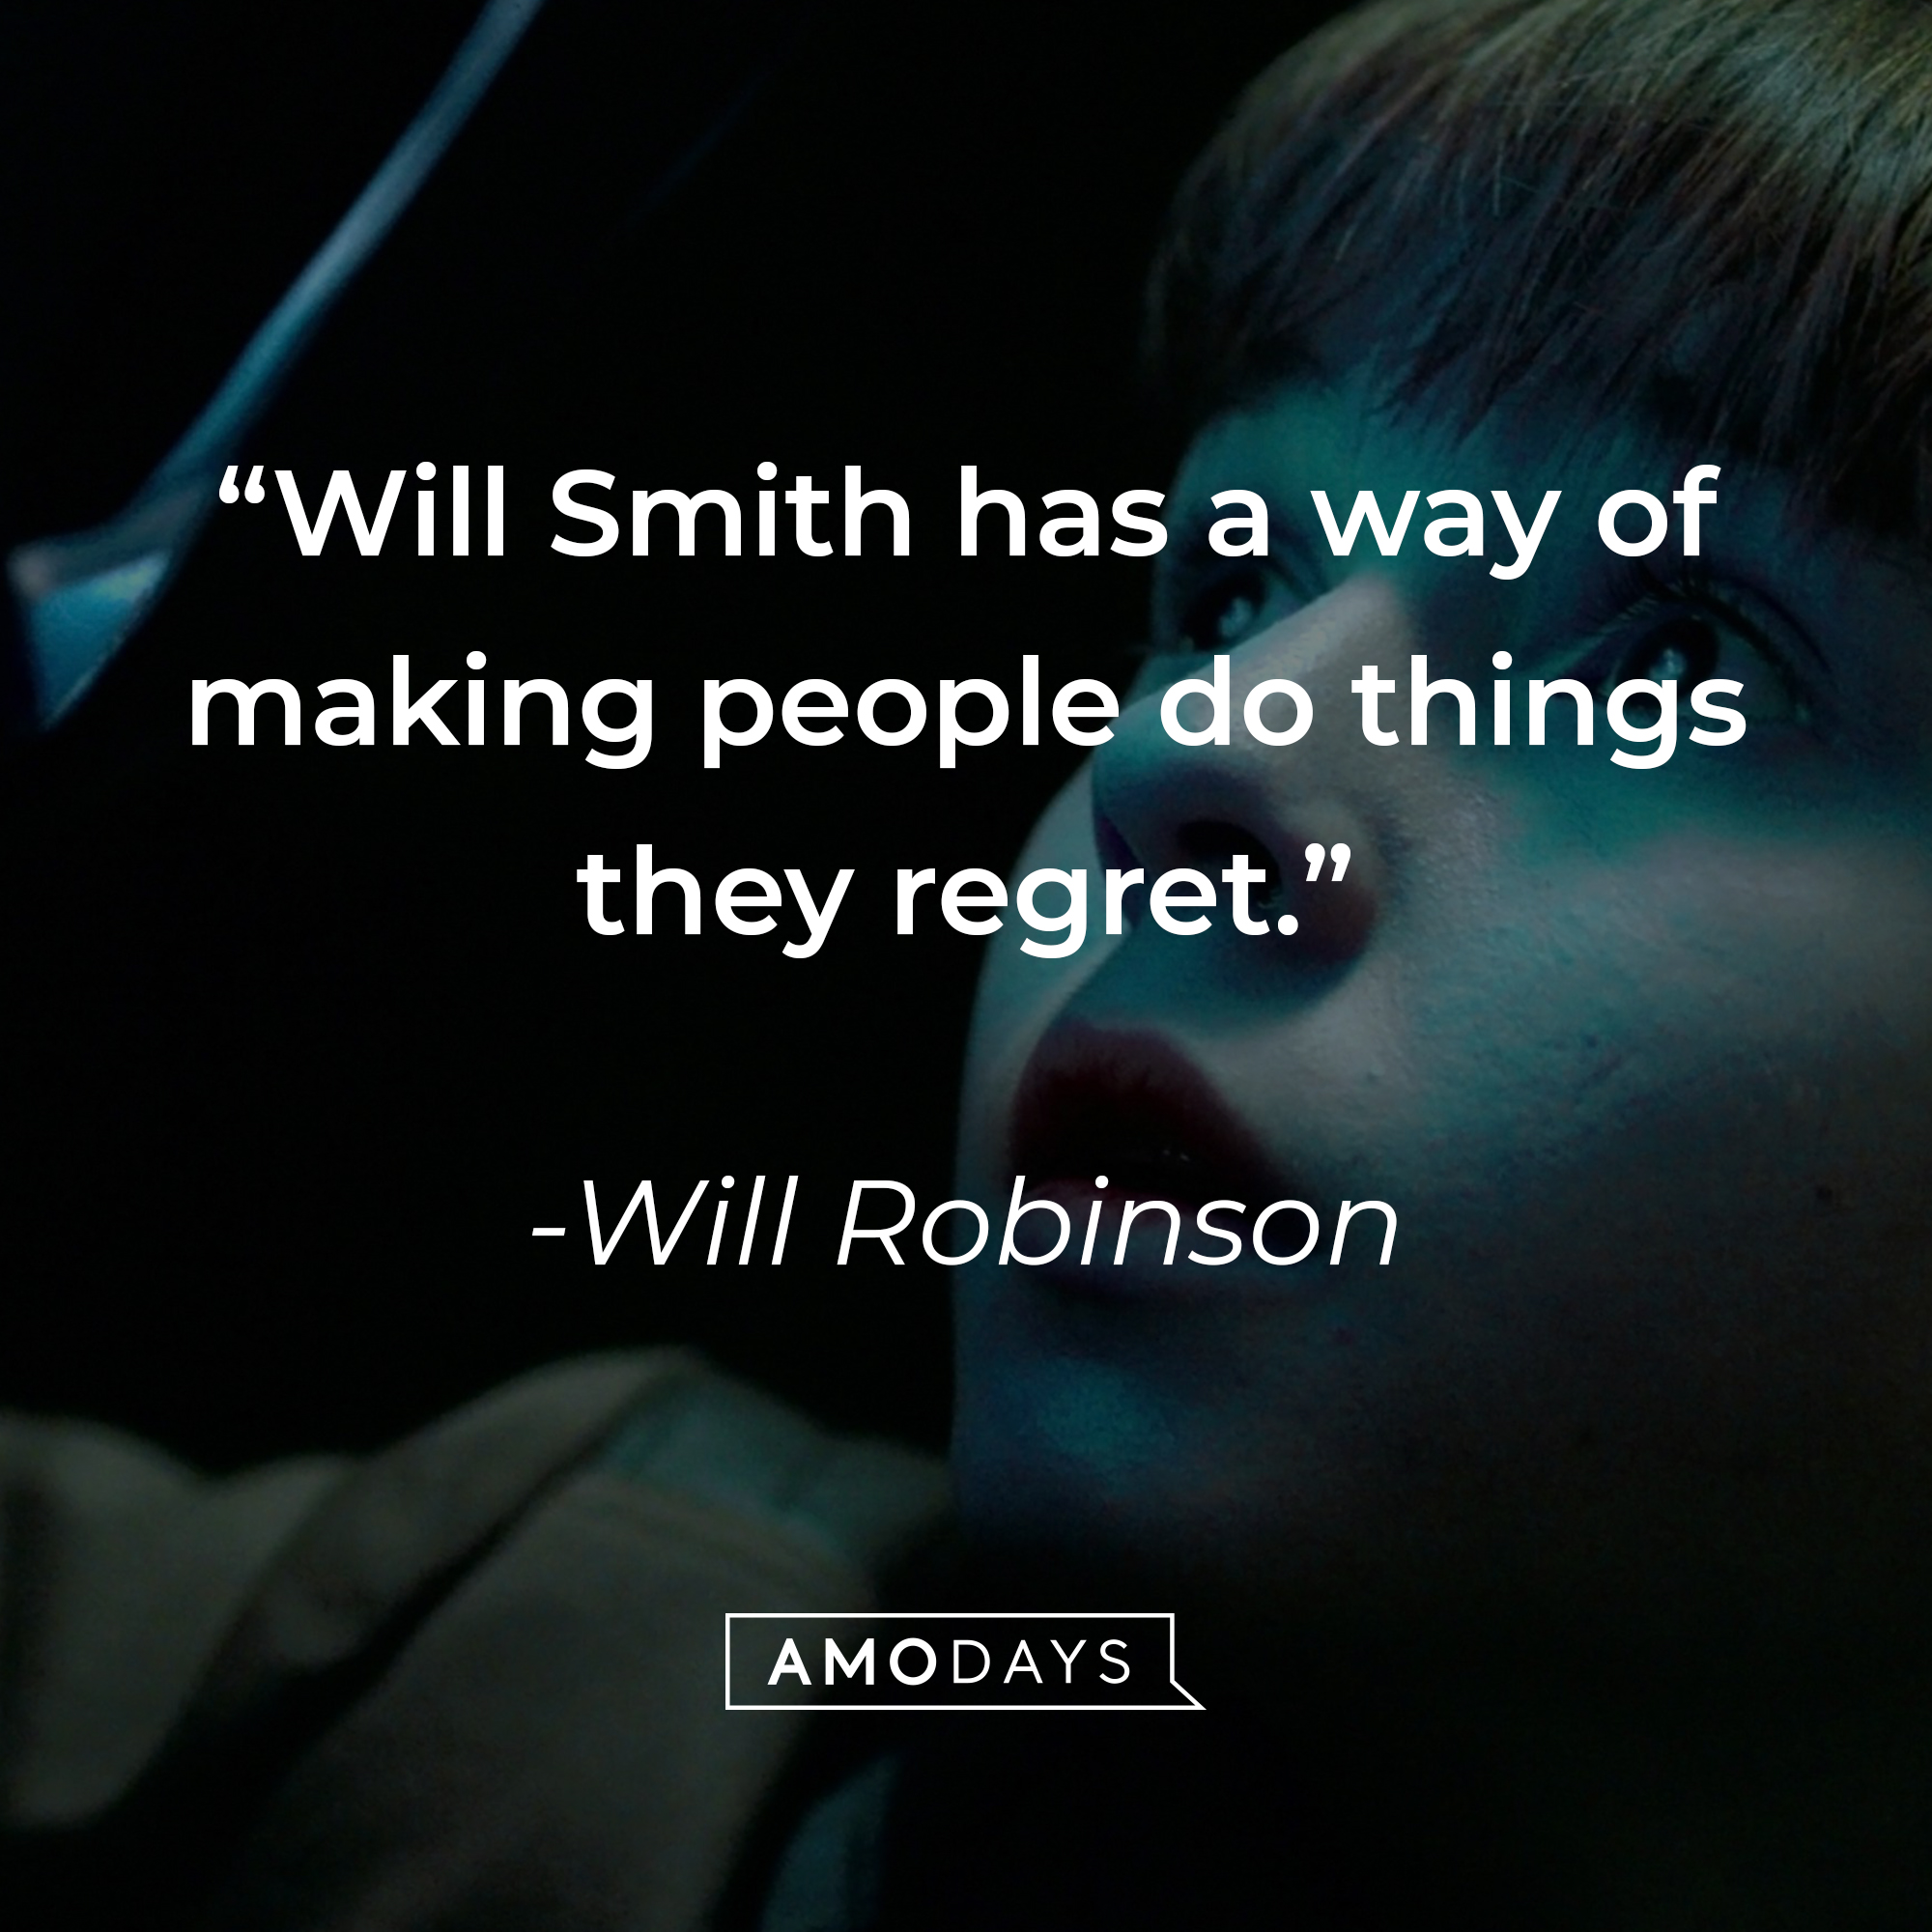 Will Robinson’s quote: "Will Smith has a way of making people do things they regret." | Image: Facebook.com/lostinspacenetflix